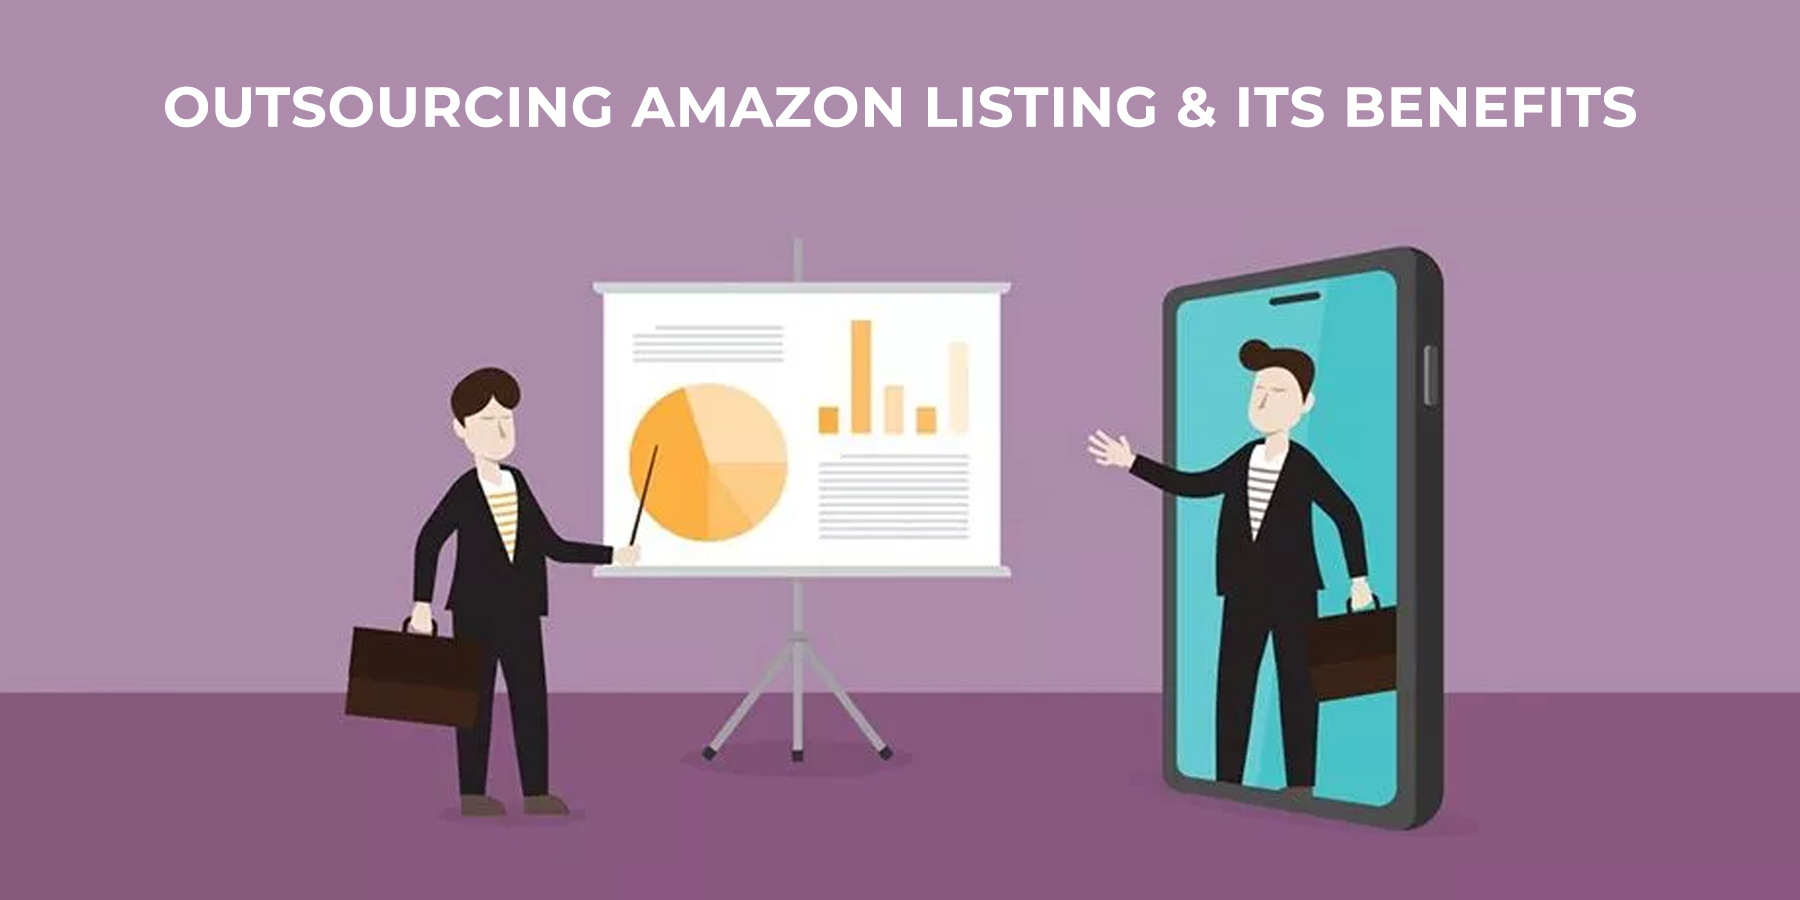 Top 6 Benefits Of Outsourcing Amazon Listing Services